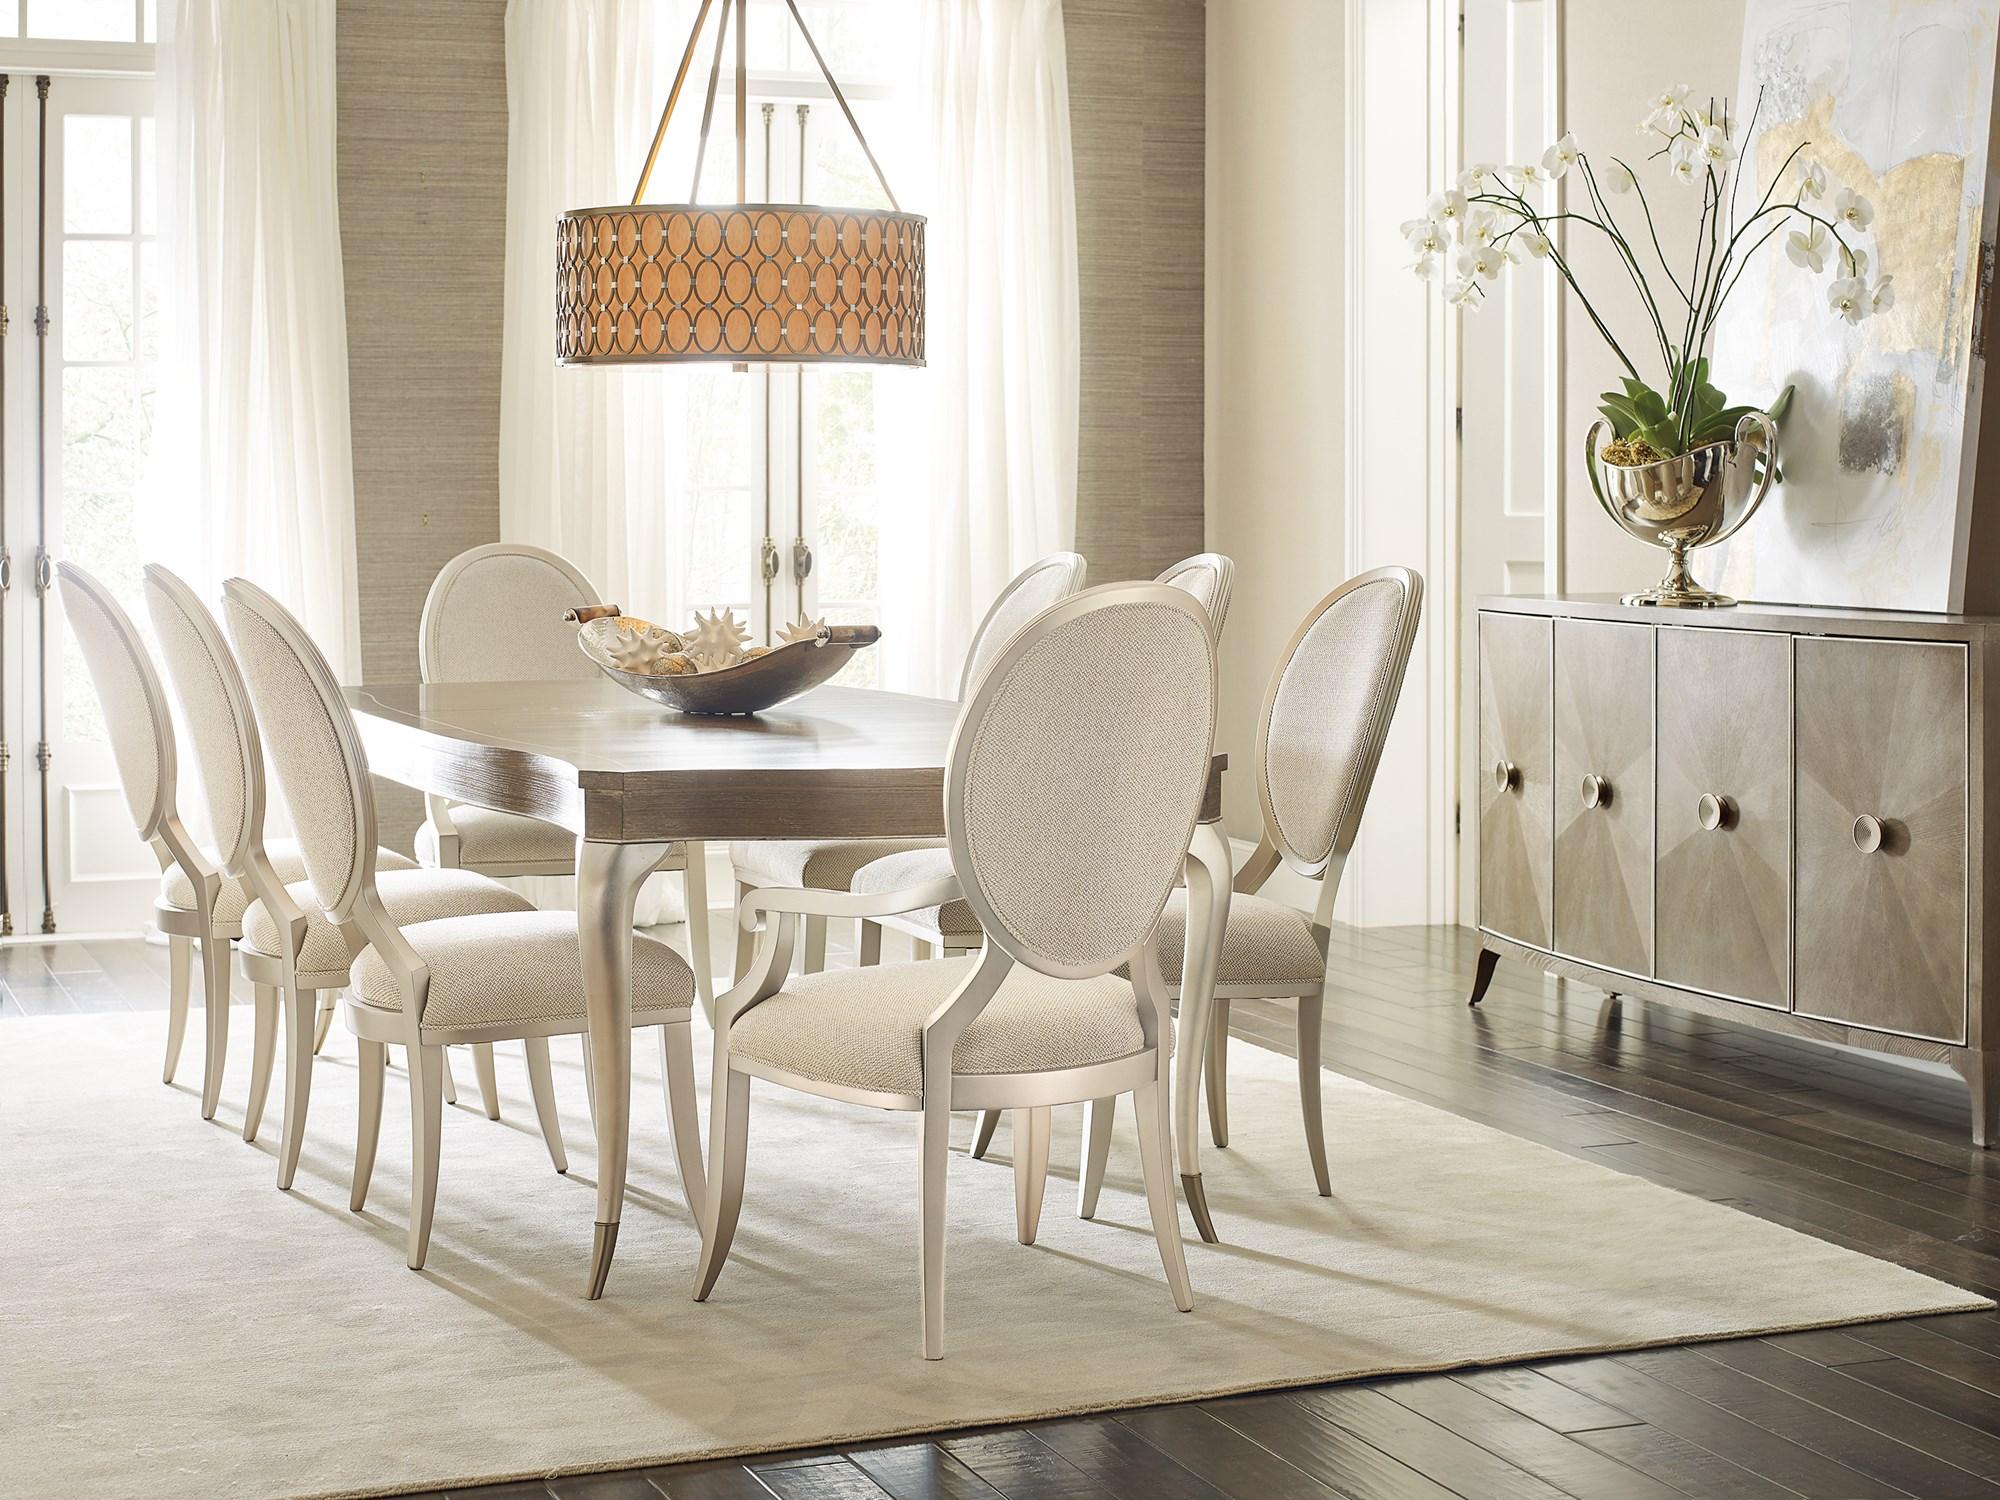 Contemporary Dining Table Set AVONDALE RECTANGLE DINING TABLE / AVONDALE SIDE CHAIR / AVONDALE ARM CHAIR C022-417-201-Set-9 in Driftwood, Silver Fabric